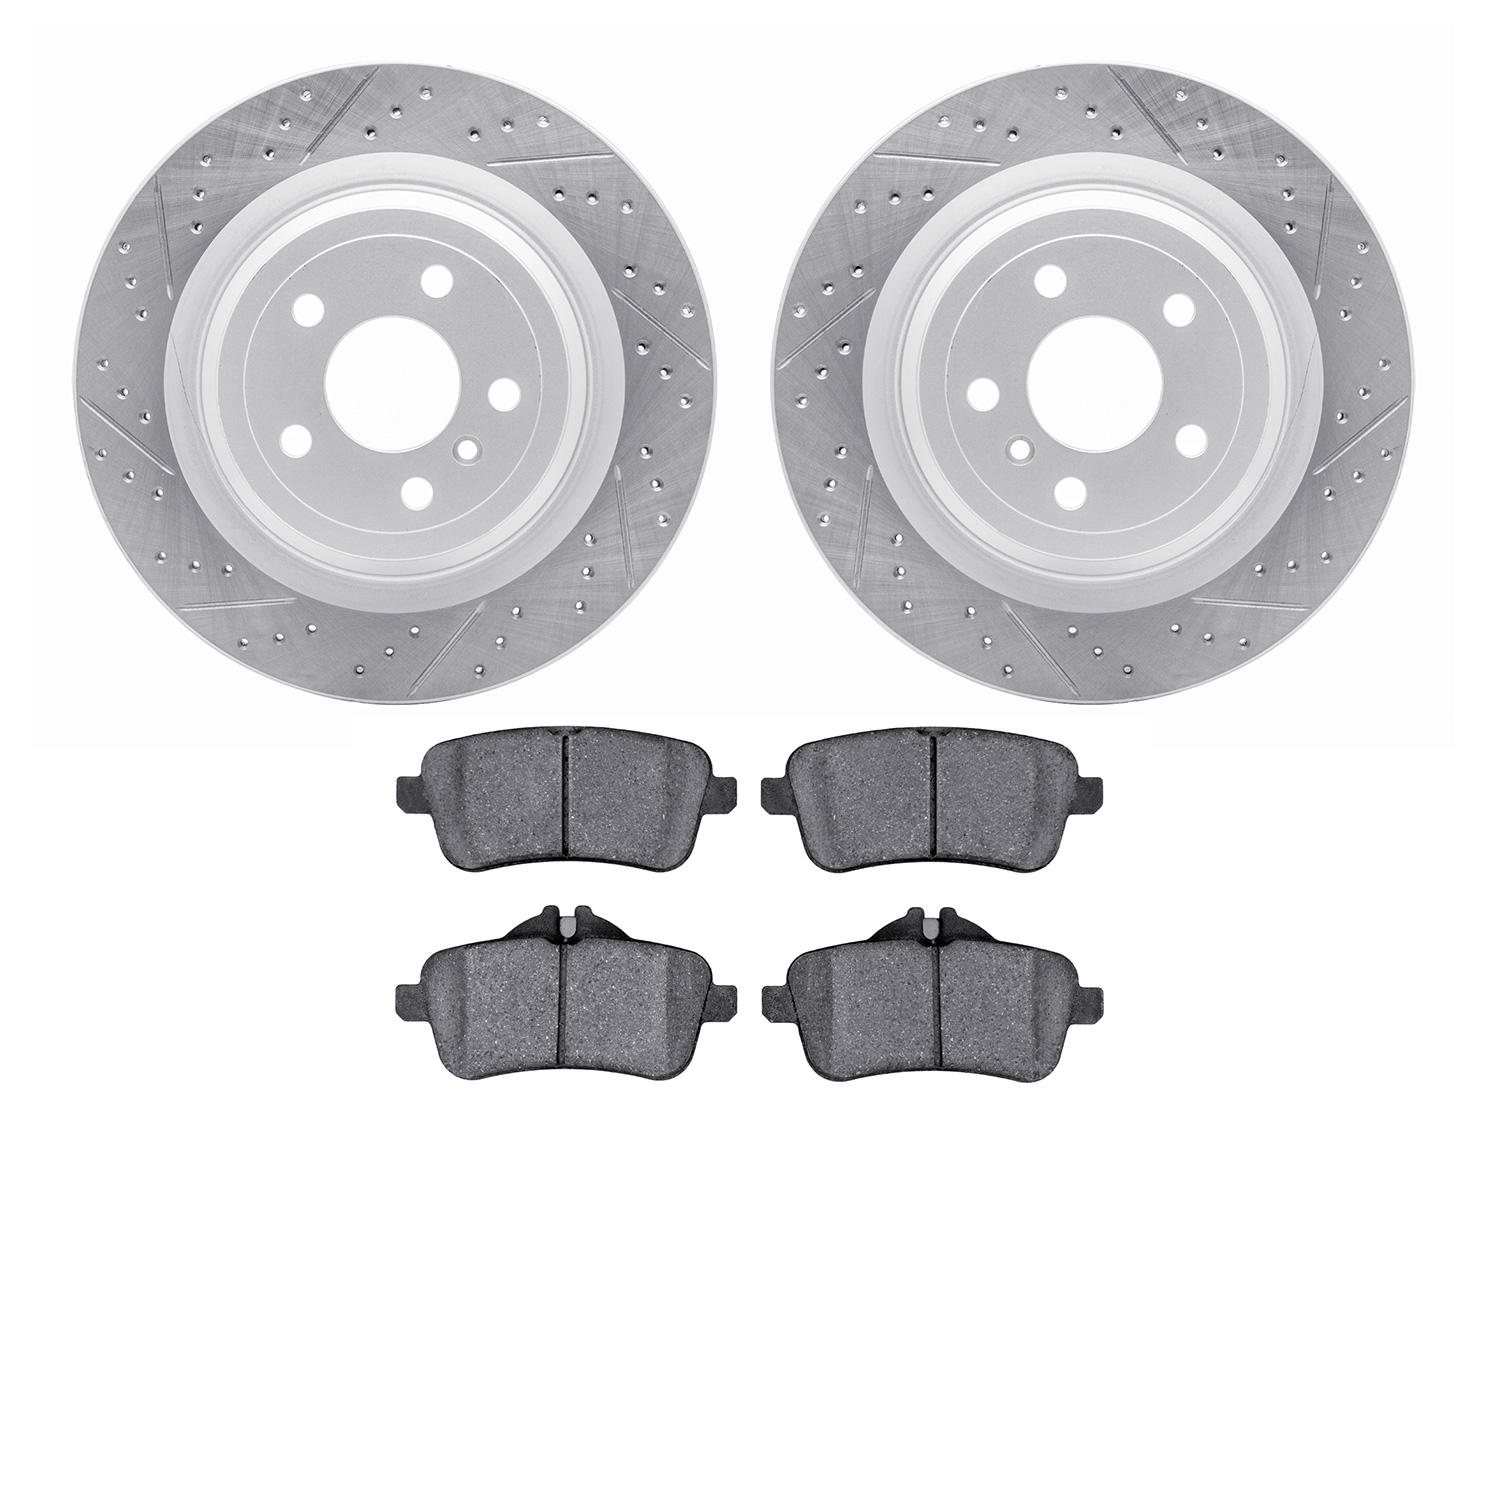 2502-63060 Geoperformance Drilled/Slotted Rotors w/5000 Advanced Brake Pads Kit, 2012-2019 Mercedes-Benz, Position: Rear